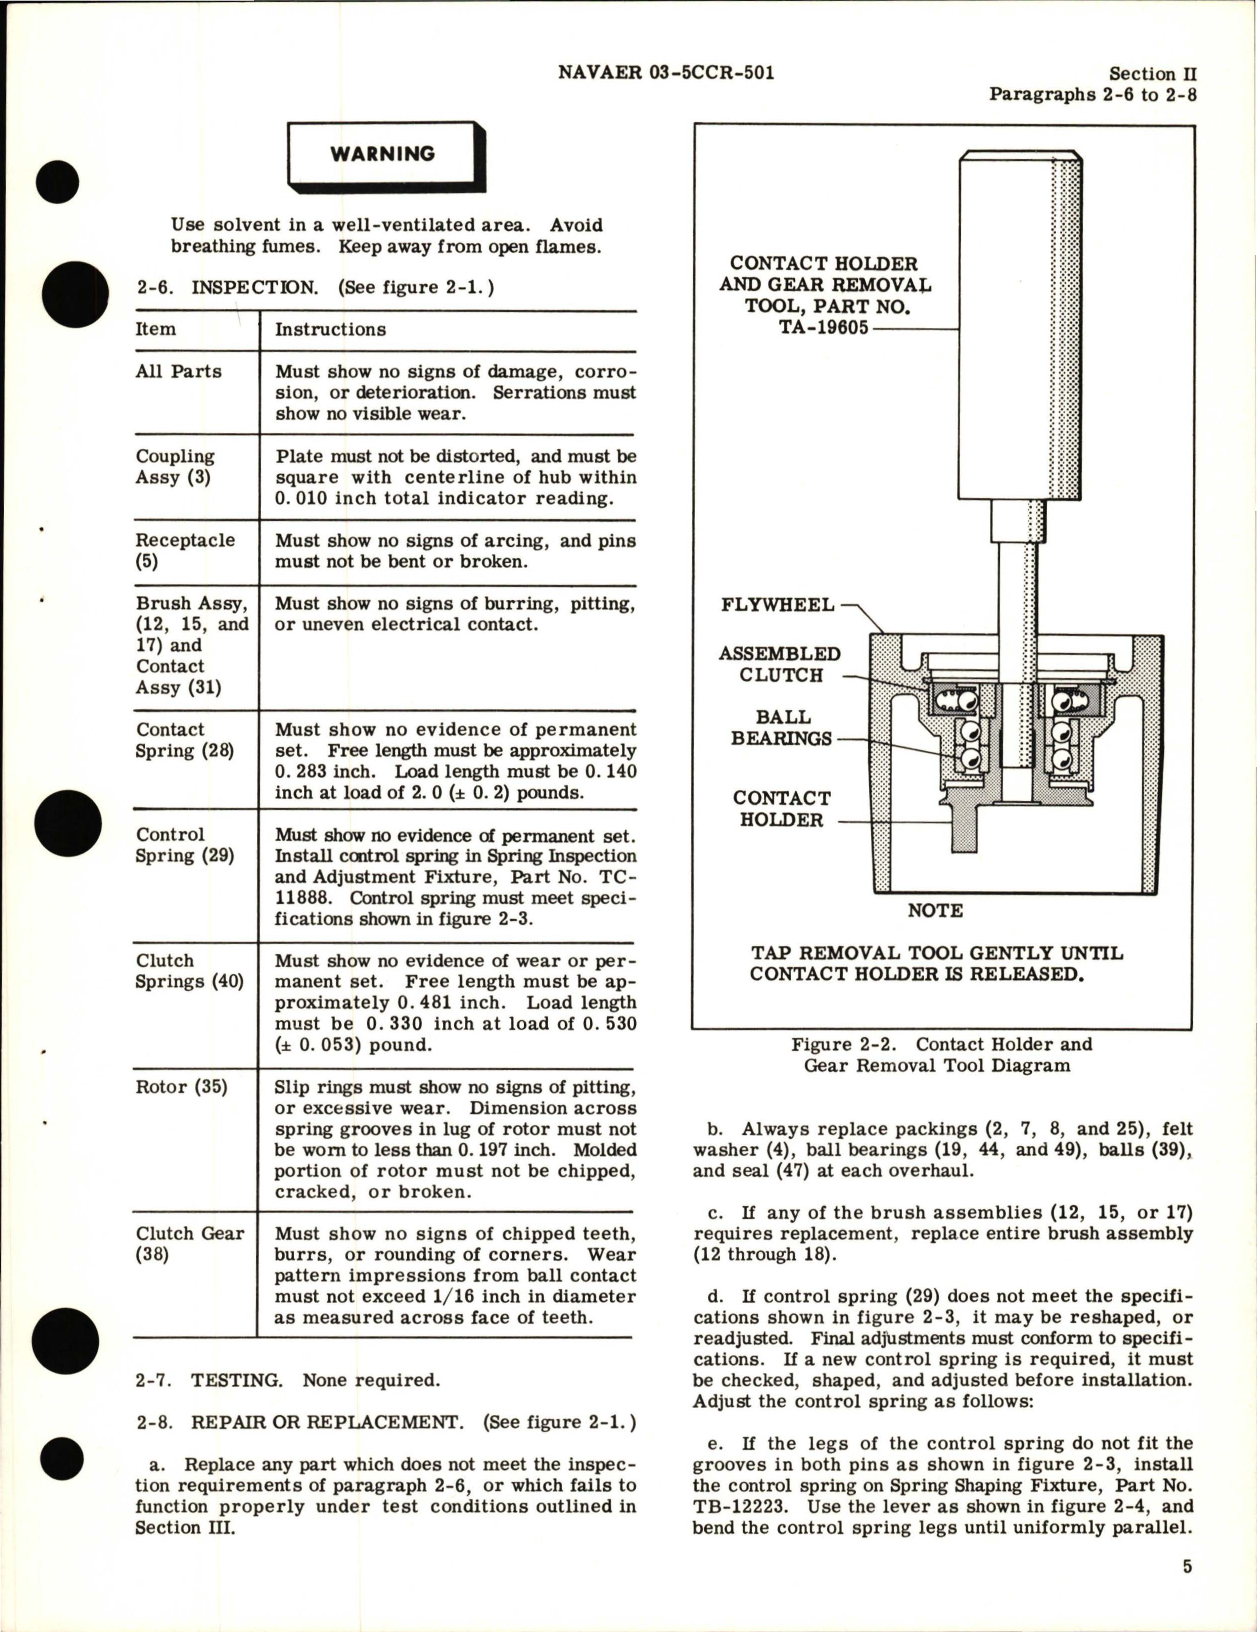 Sample page 7 from AirCorps Library document: Overhaul Instructions for Skid and Locked Wheel Detector Assemblies - 5823 Part Series